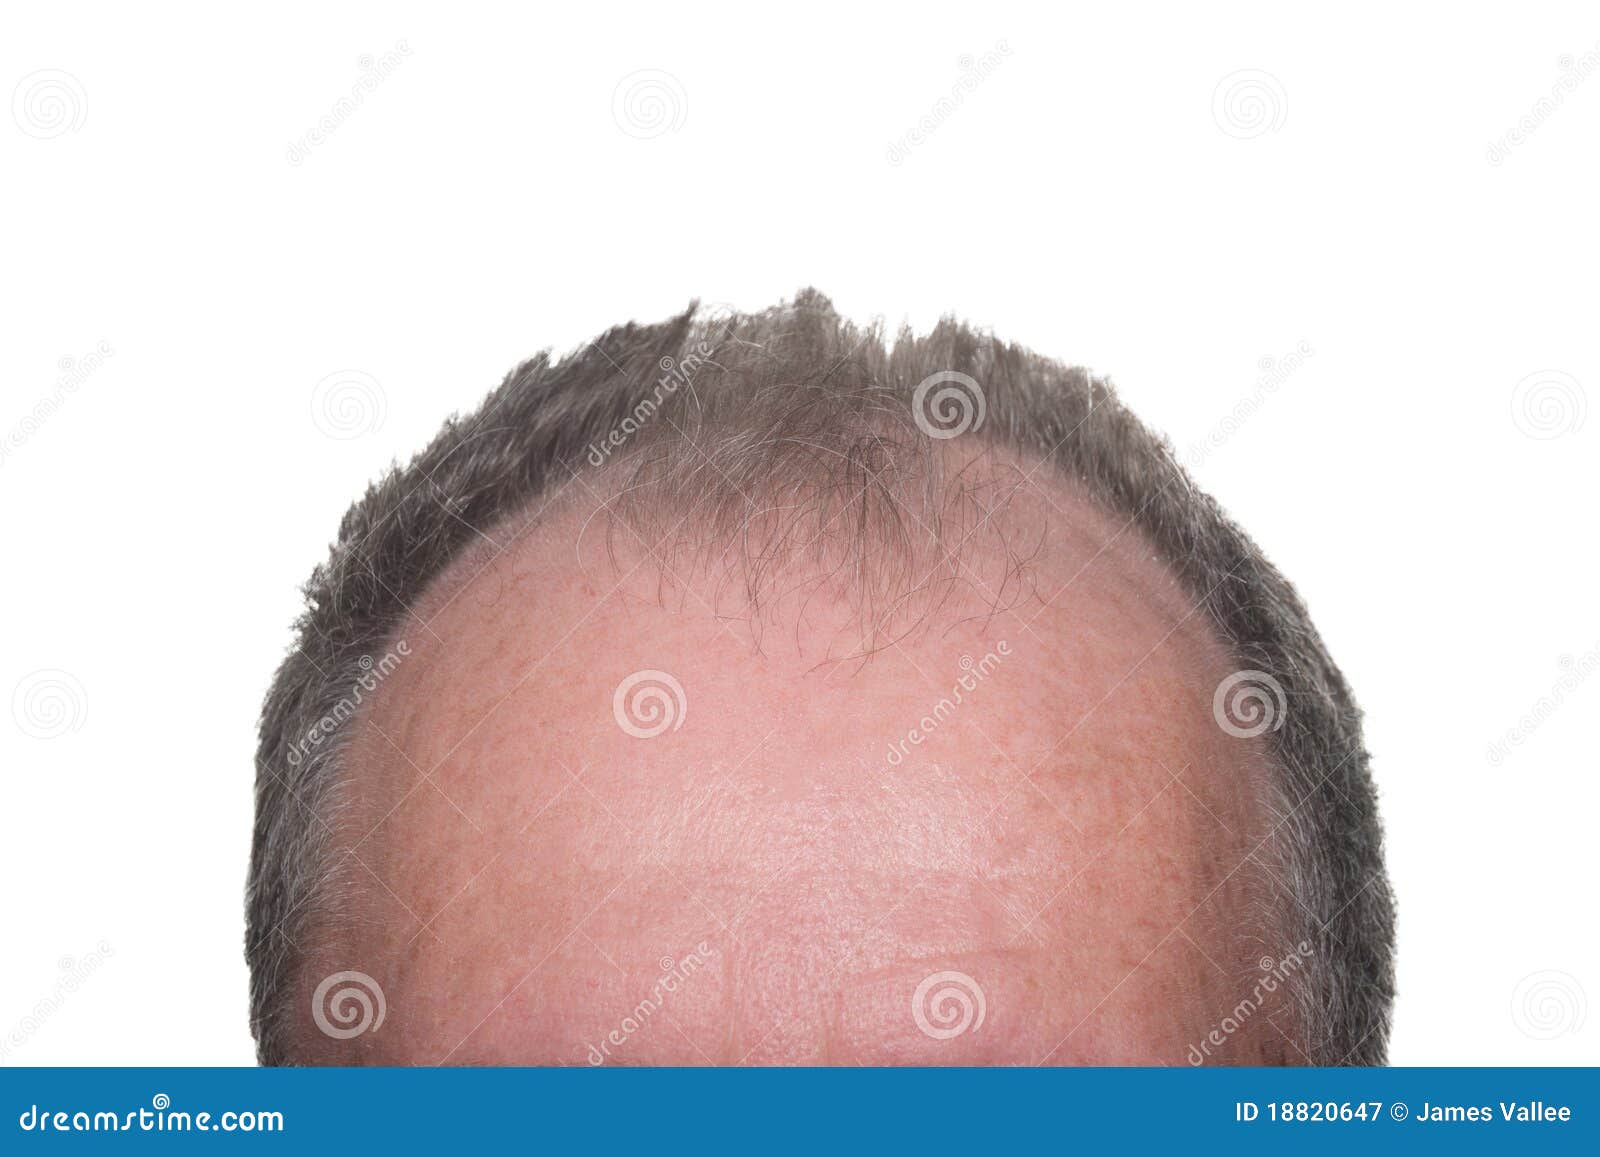 Male Pattern Baldness stock image. Image of hairline - 18820647